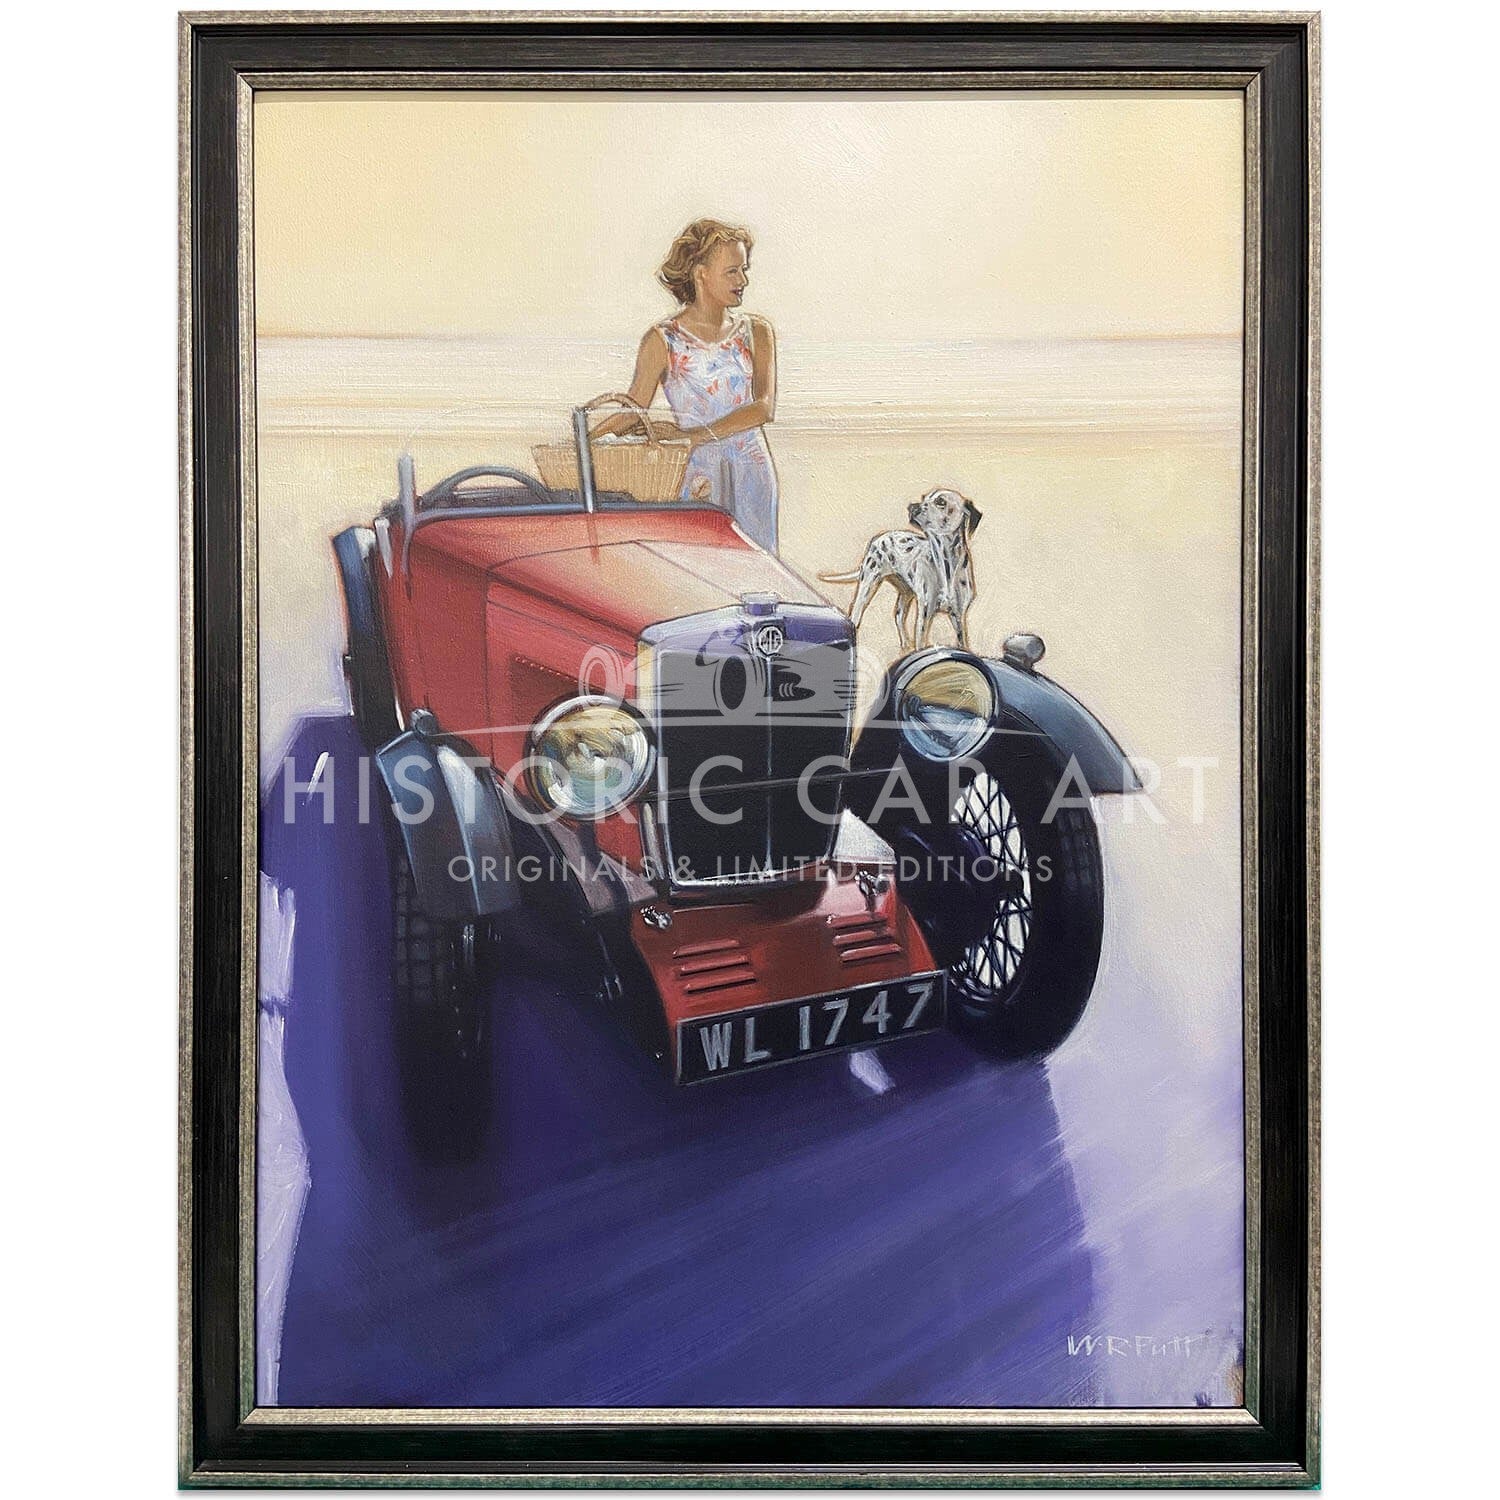 First on the Beach | 1932 MG Midget with Dalmatian | Artwork